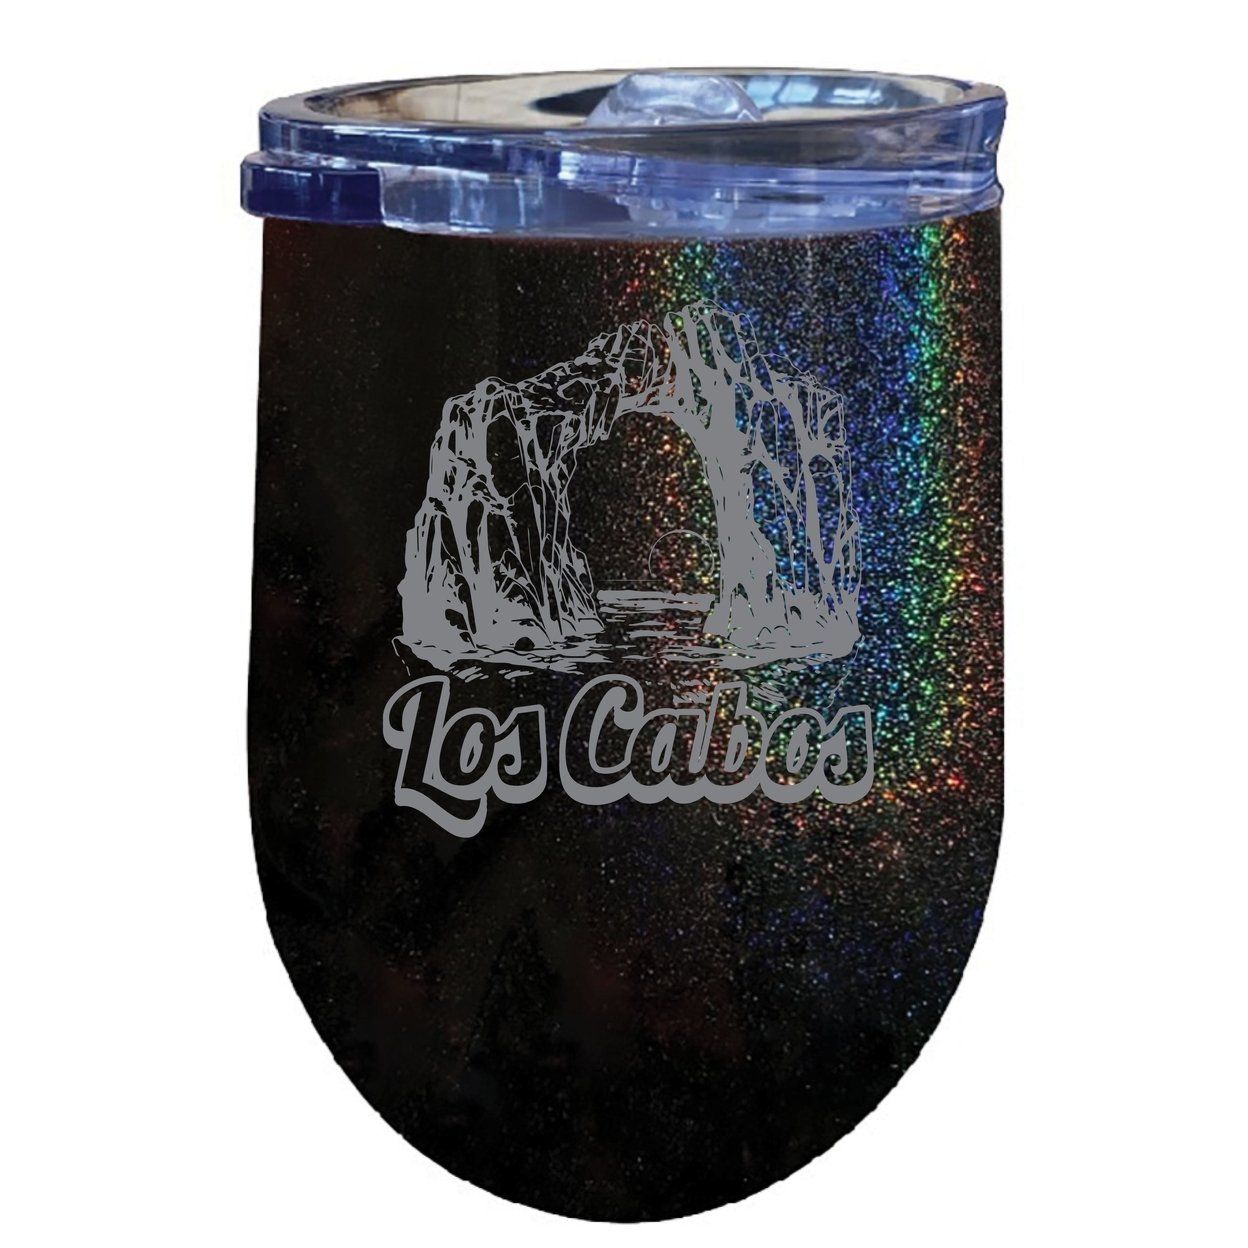 Los Cabos Mexico Souvenir 12 Oz Engraved Insulated Wine Stainless Steel Tumbler - Purple,,4-Pack